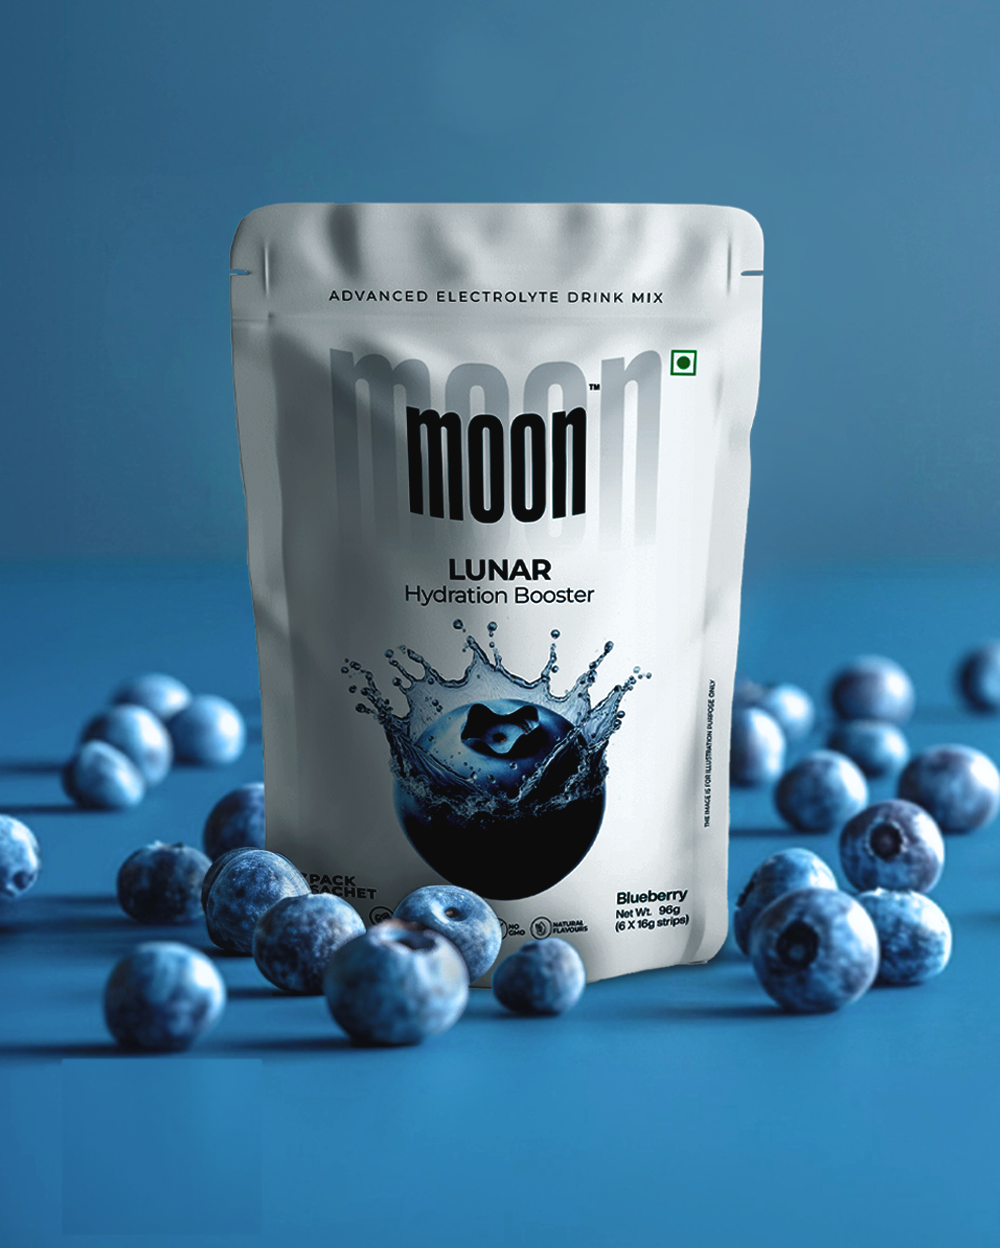 A bag of Moon Blueberry Lunar Hydration Booster on a blue background.